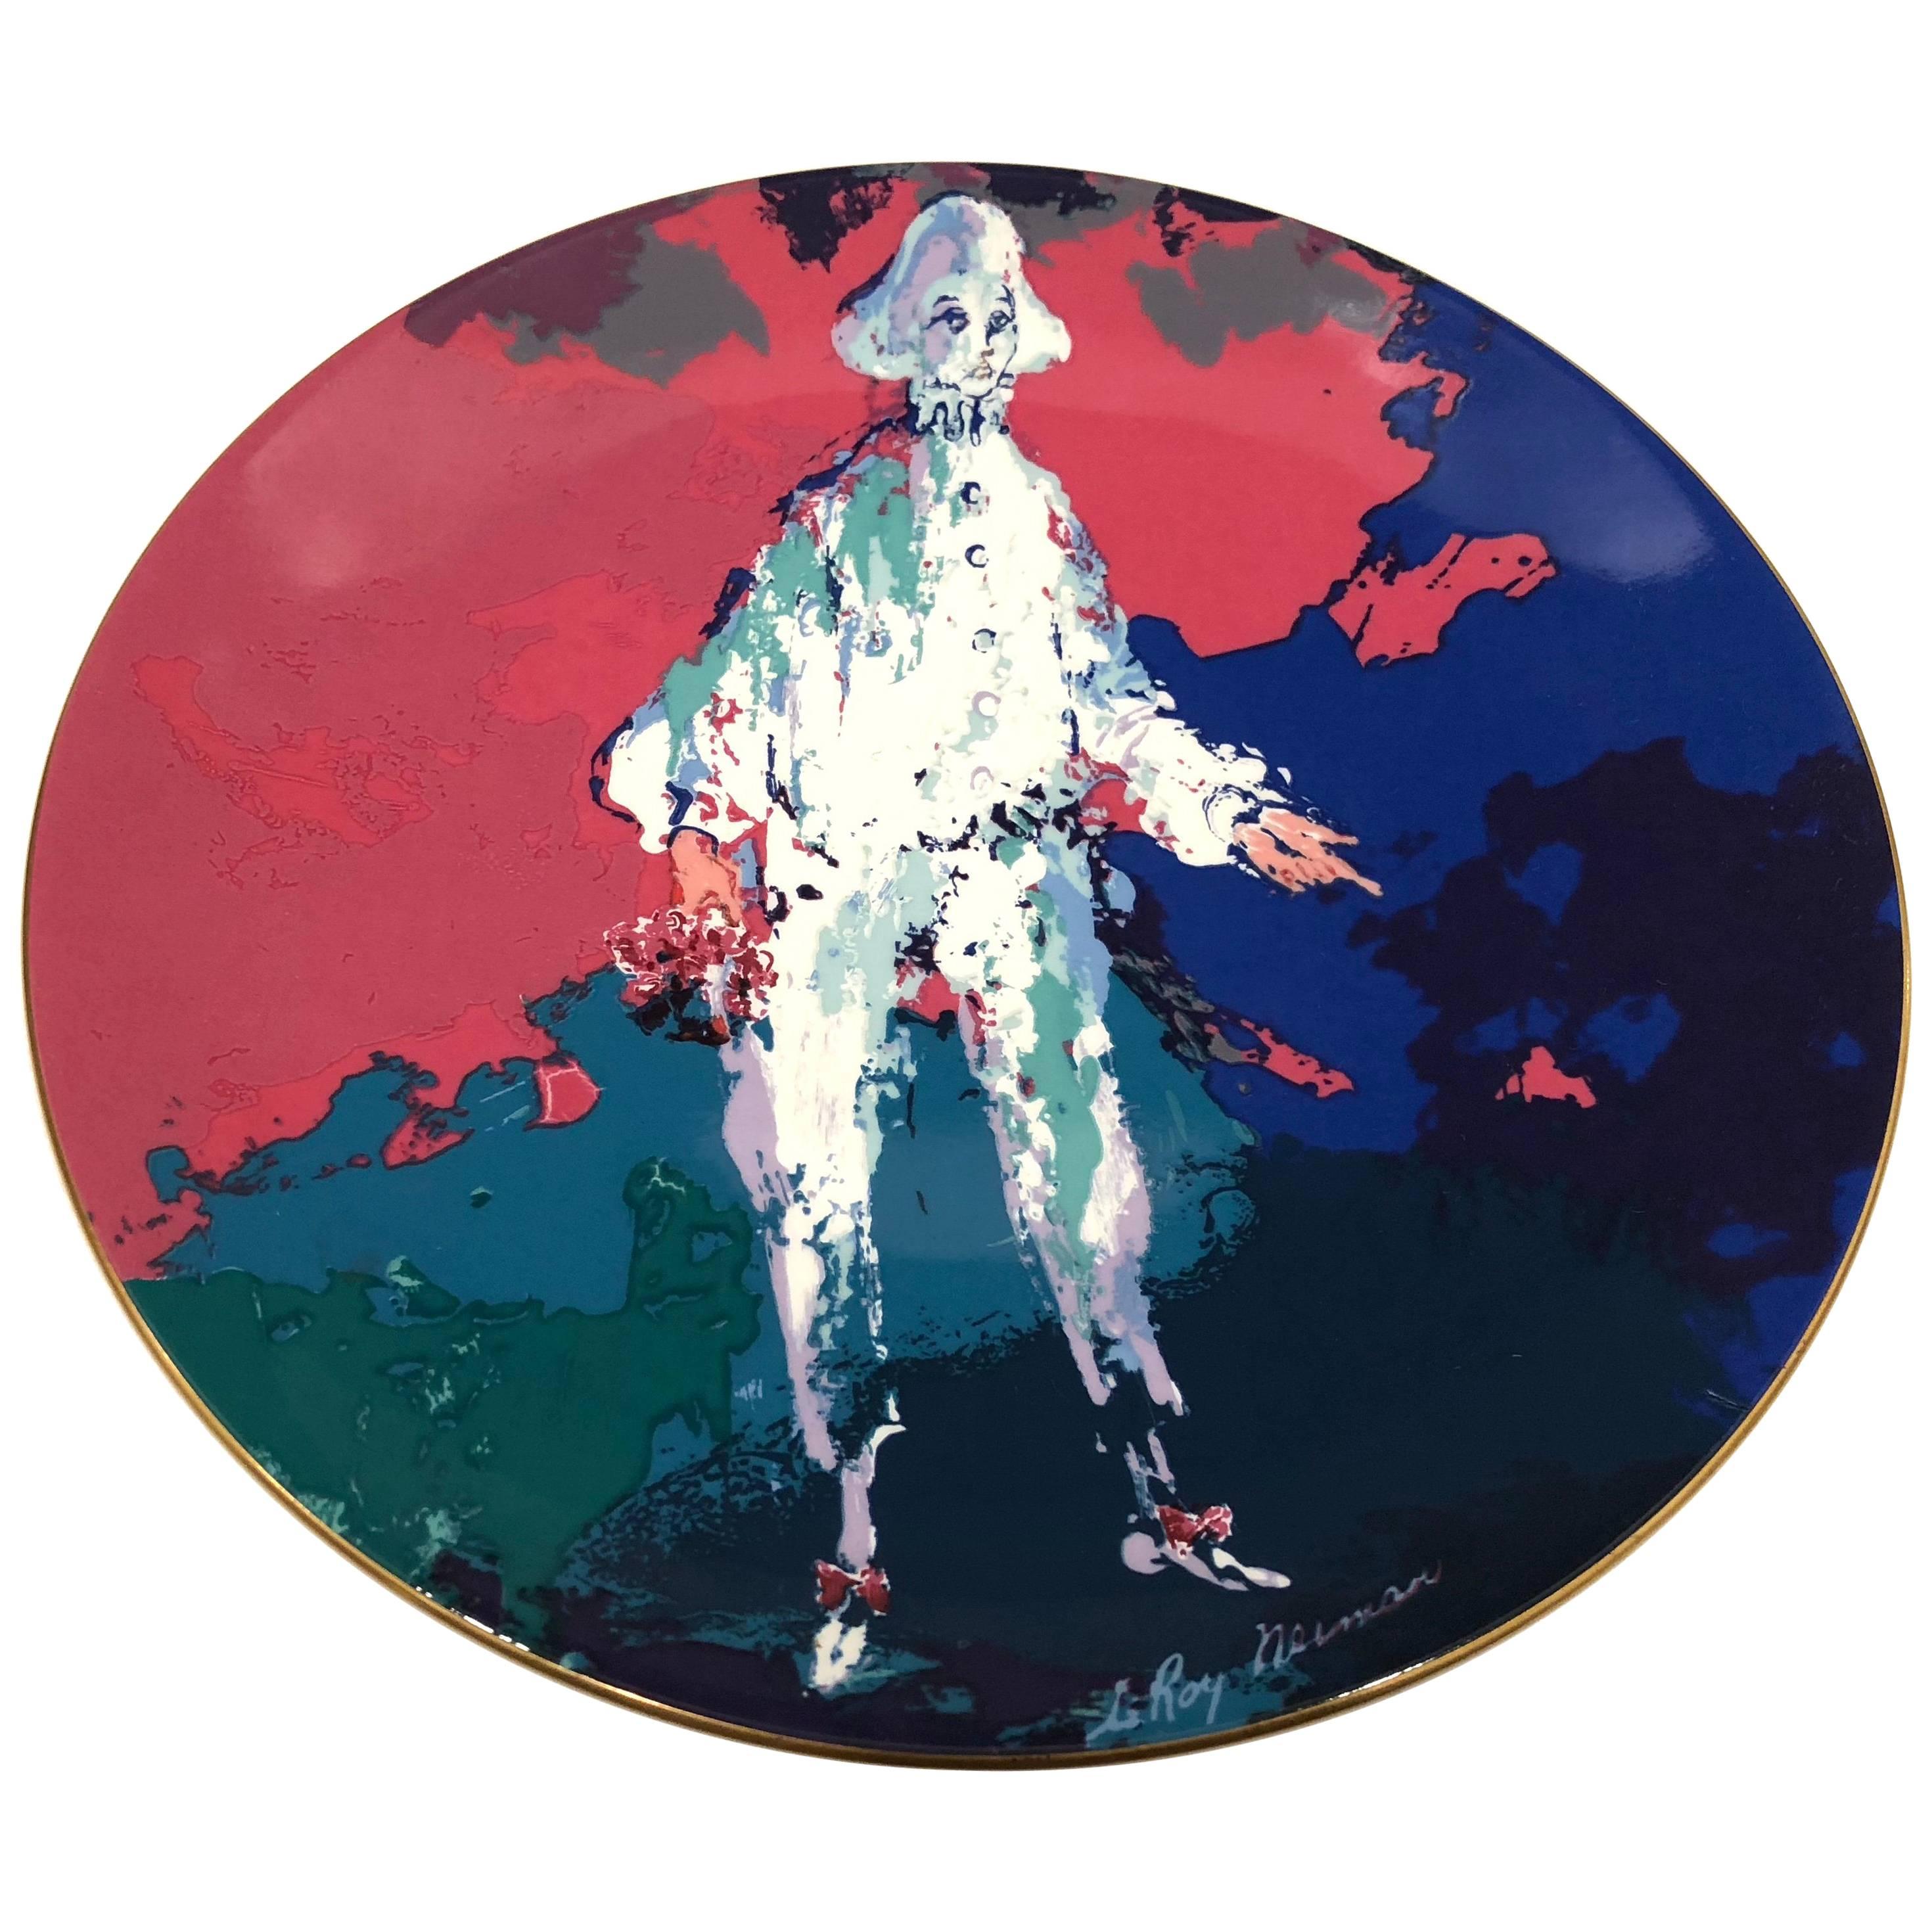 Collectors Edition Decorative Plate "Pierrot" by Leroy Neiman for Royal Daulton For Sale